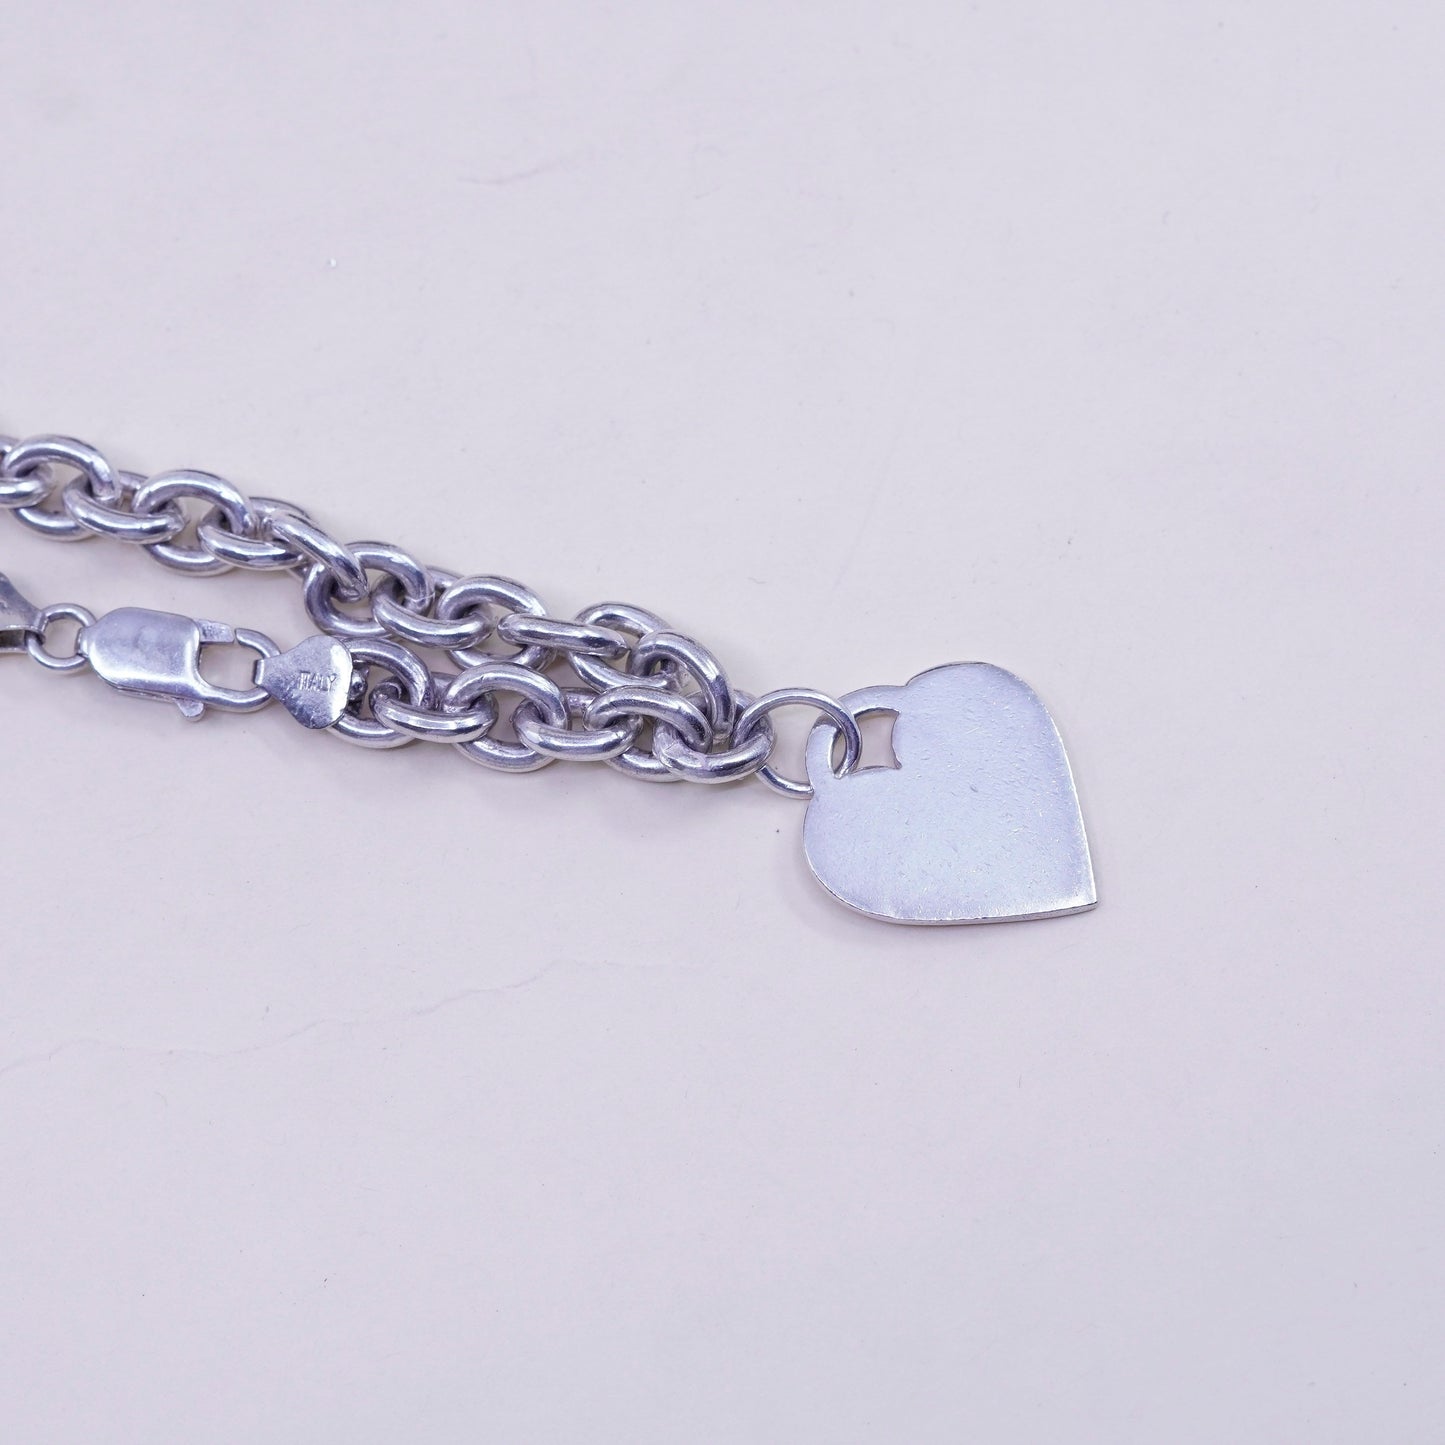 6.75”, Vintage sterling silver circle link bracelet, 925 chain with heart charm